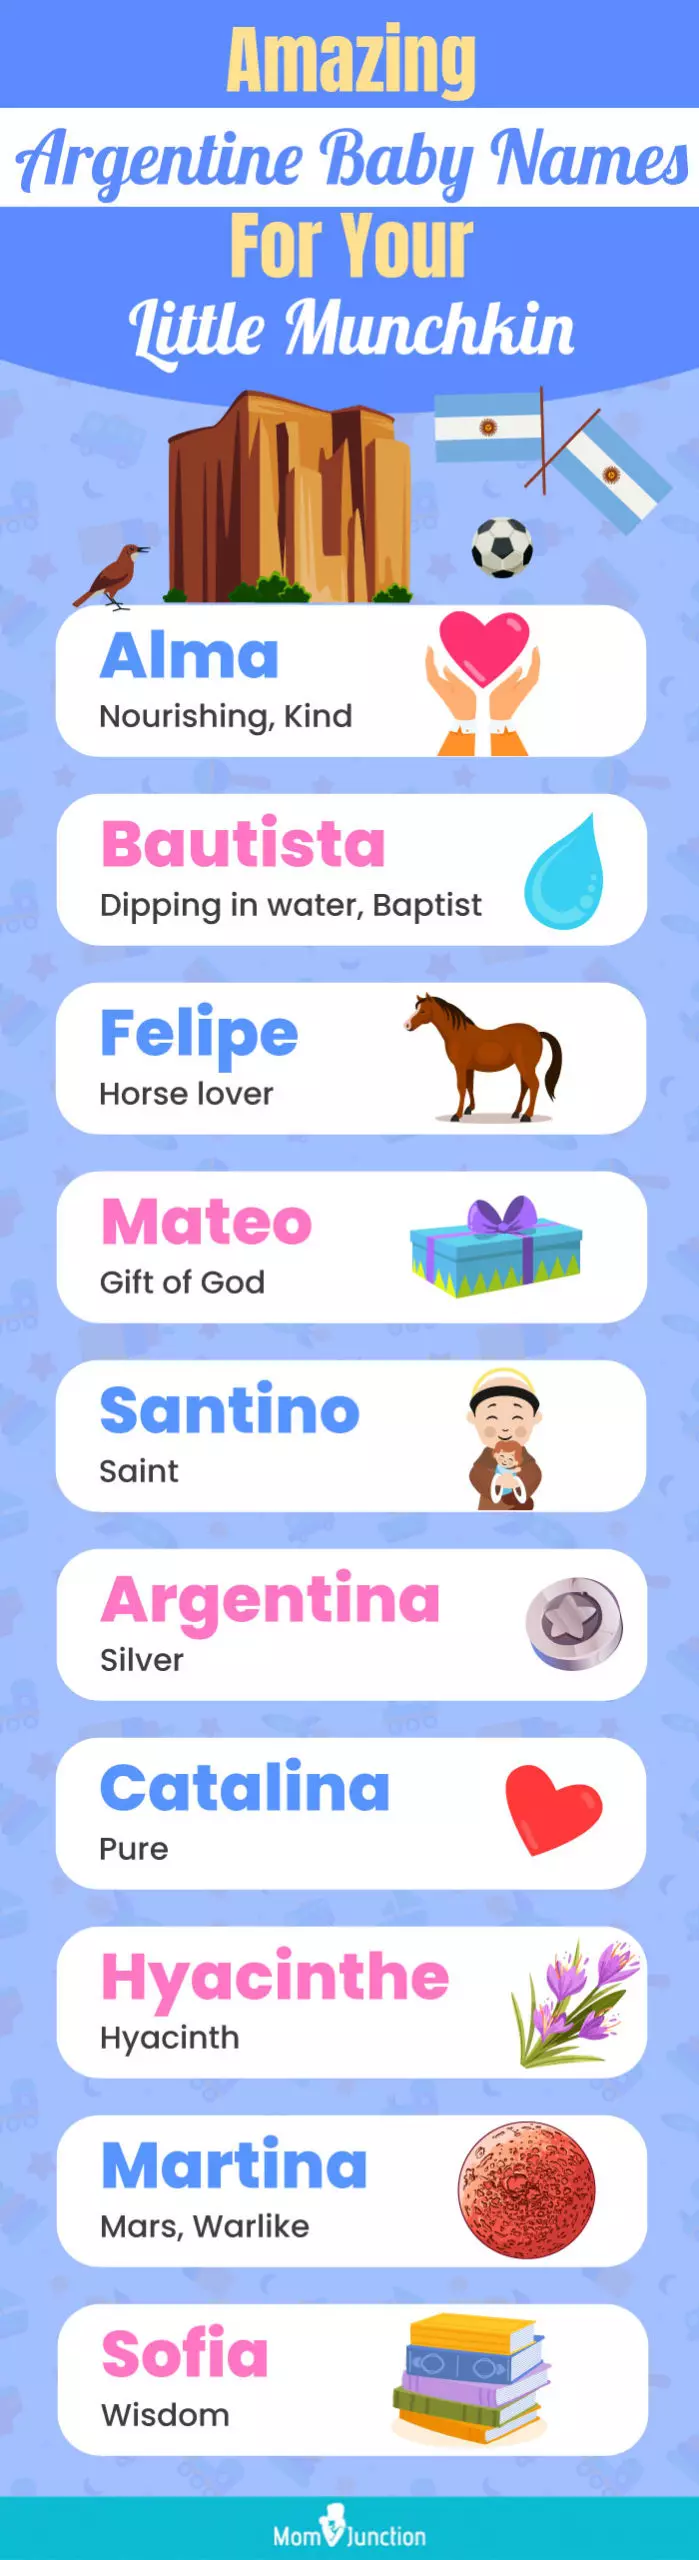 amazing argentine baby names for your little munchkin (infographic)